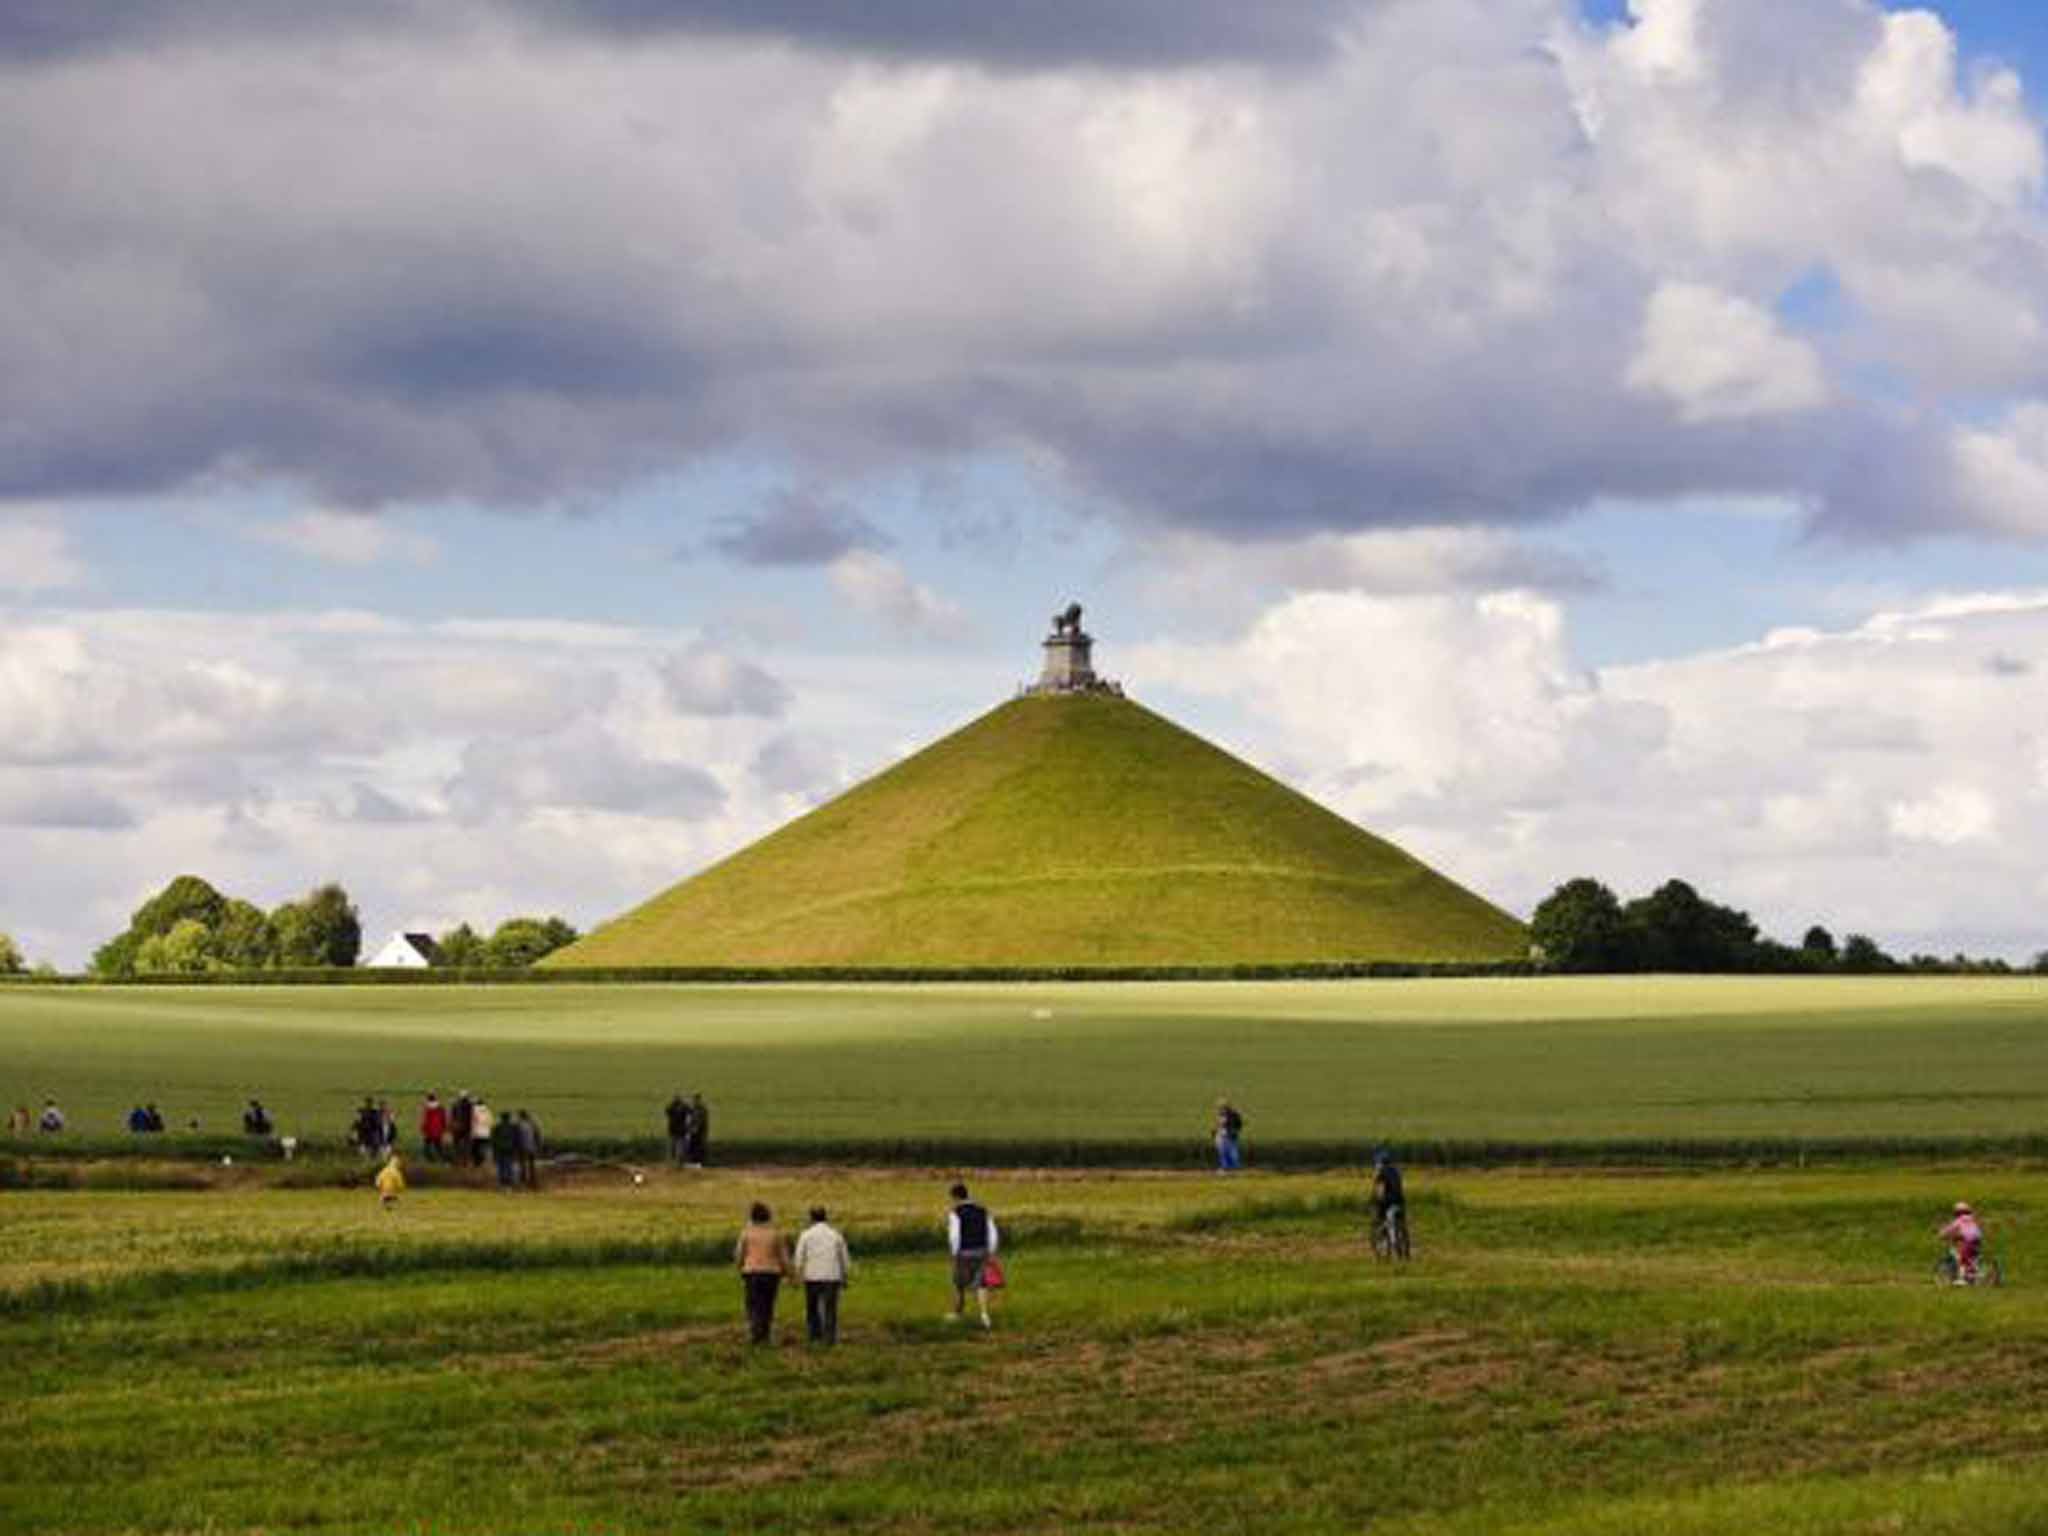 Into battle: The Lion’s Mound